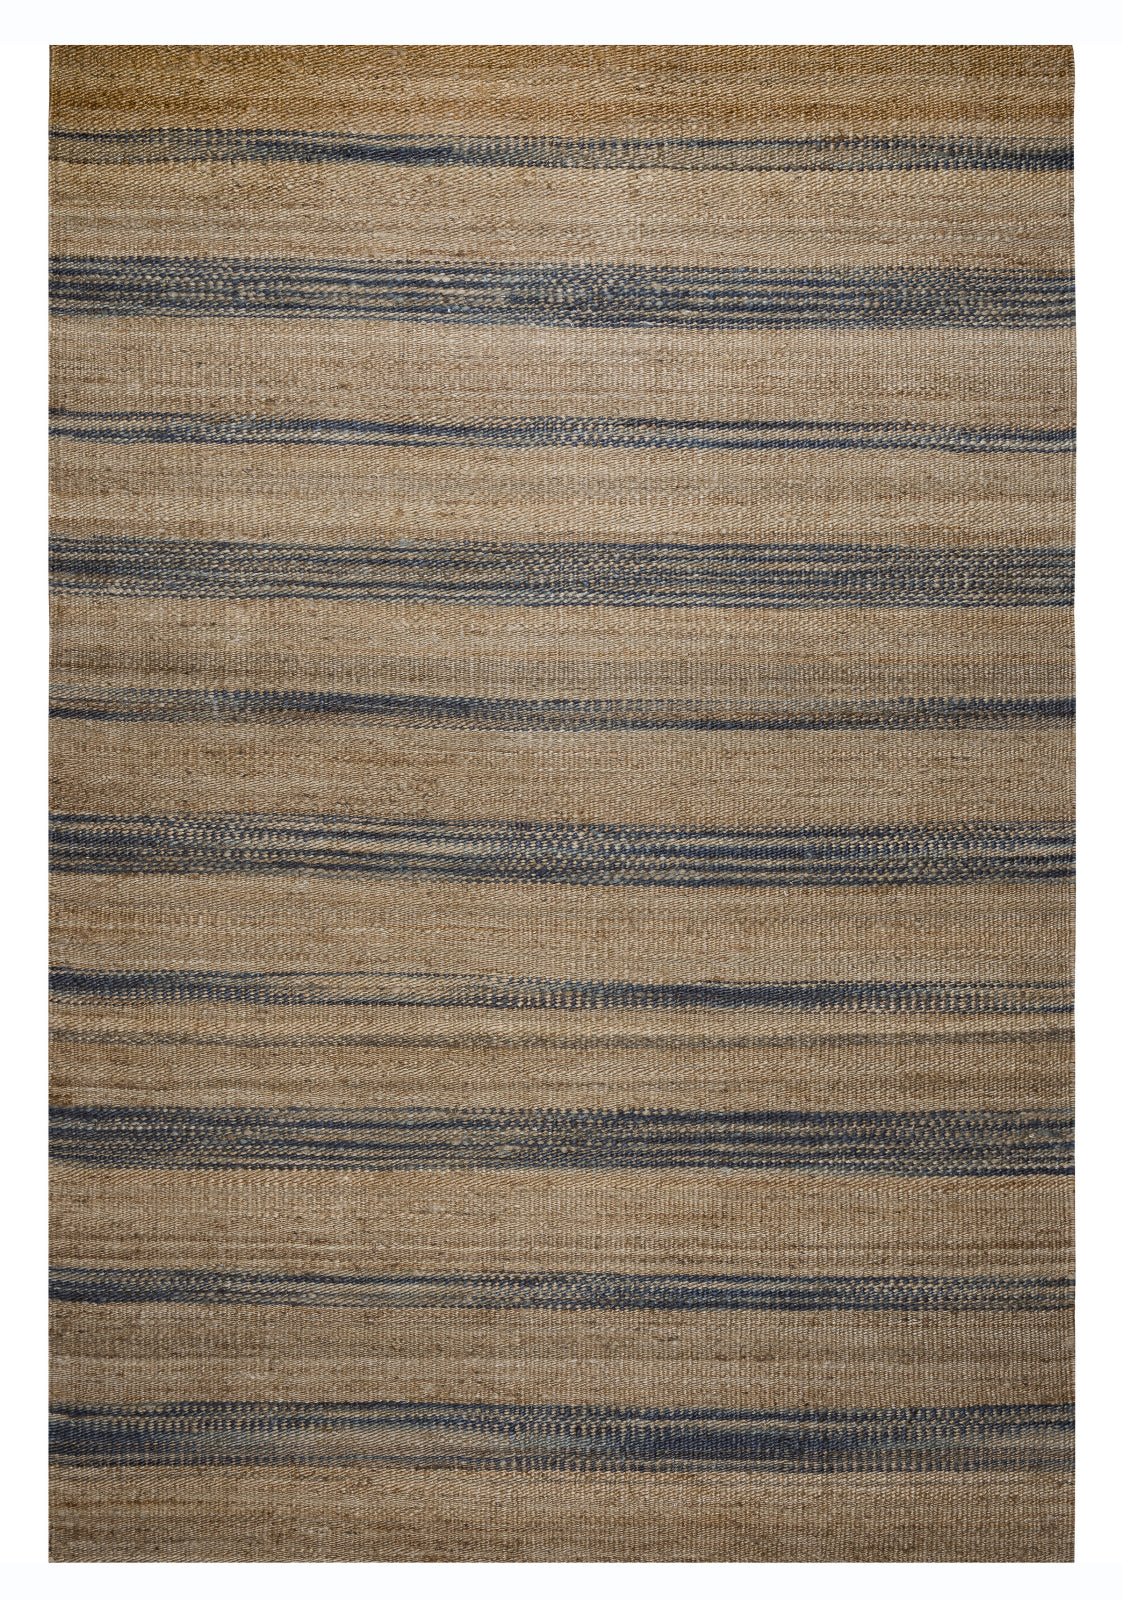 Rizzy Whittier WR9748 Natural Area Rug main image